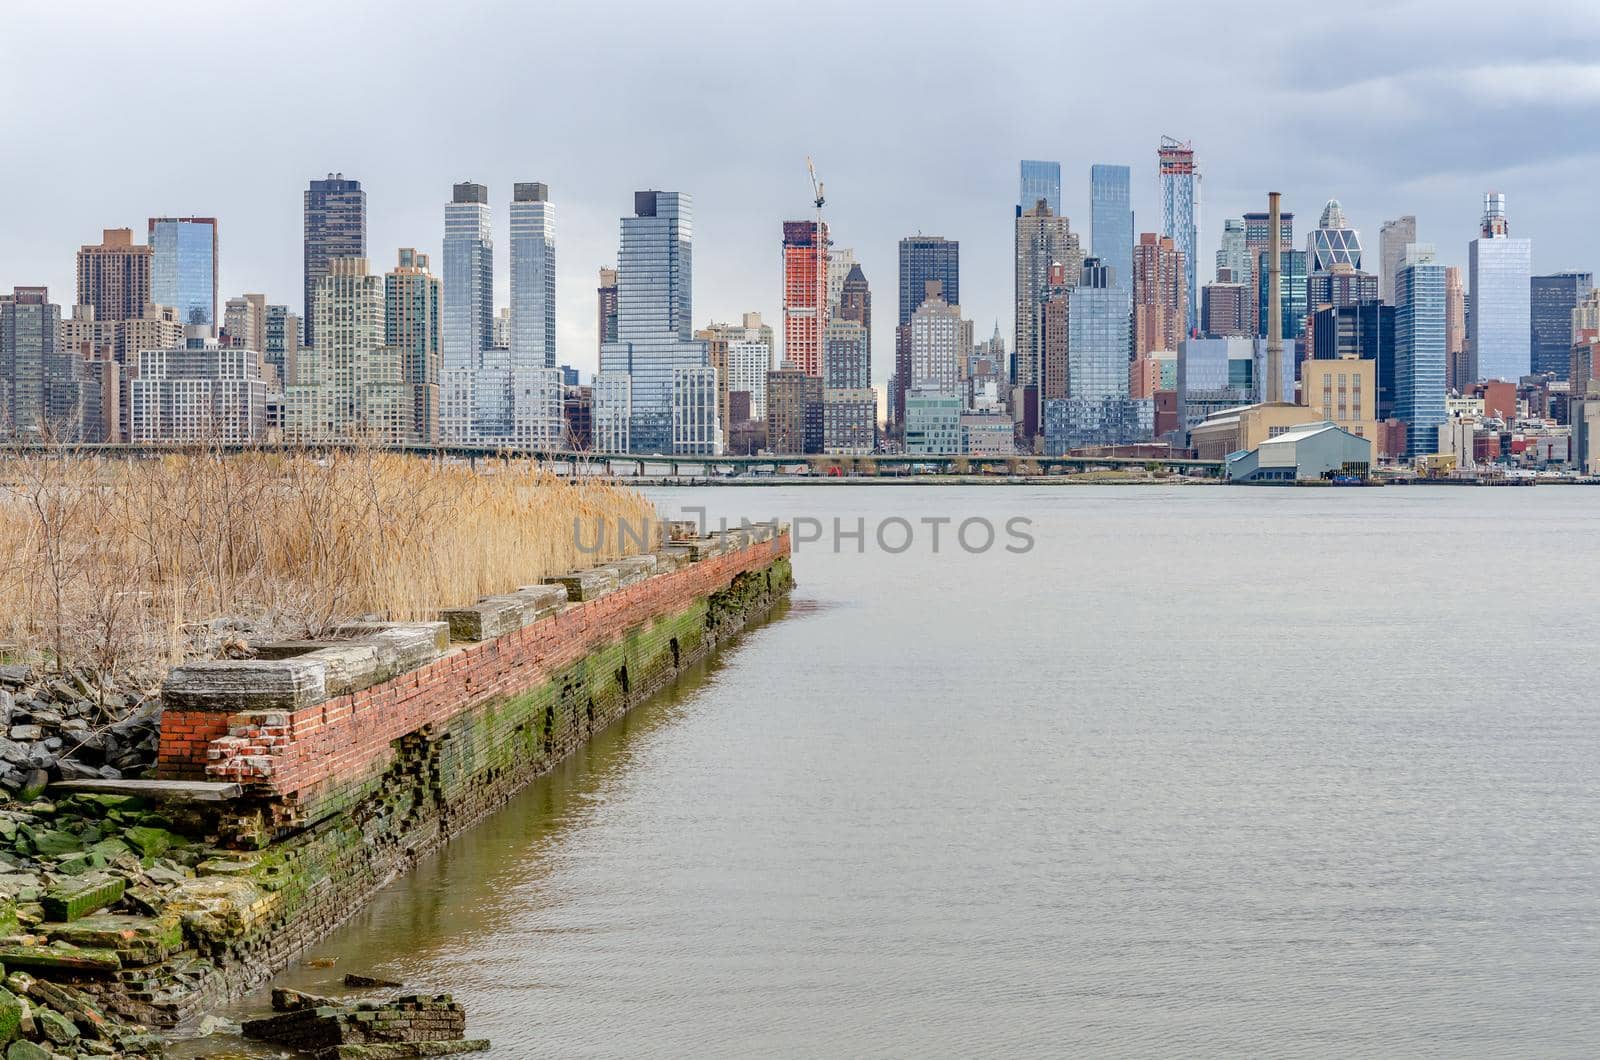 View of Manhattan Skyline, NYC from other side of Hudson river, New Jersey by bildgigant